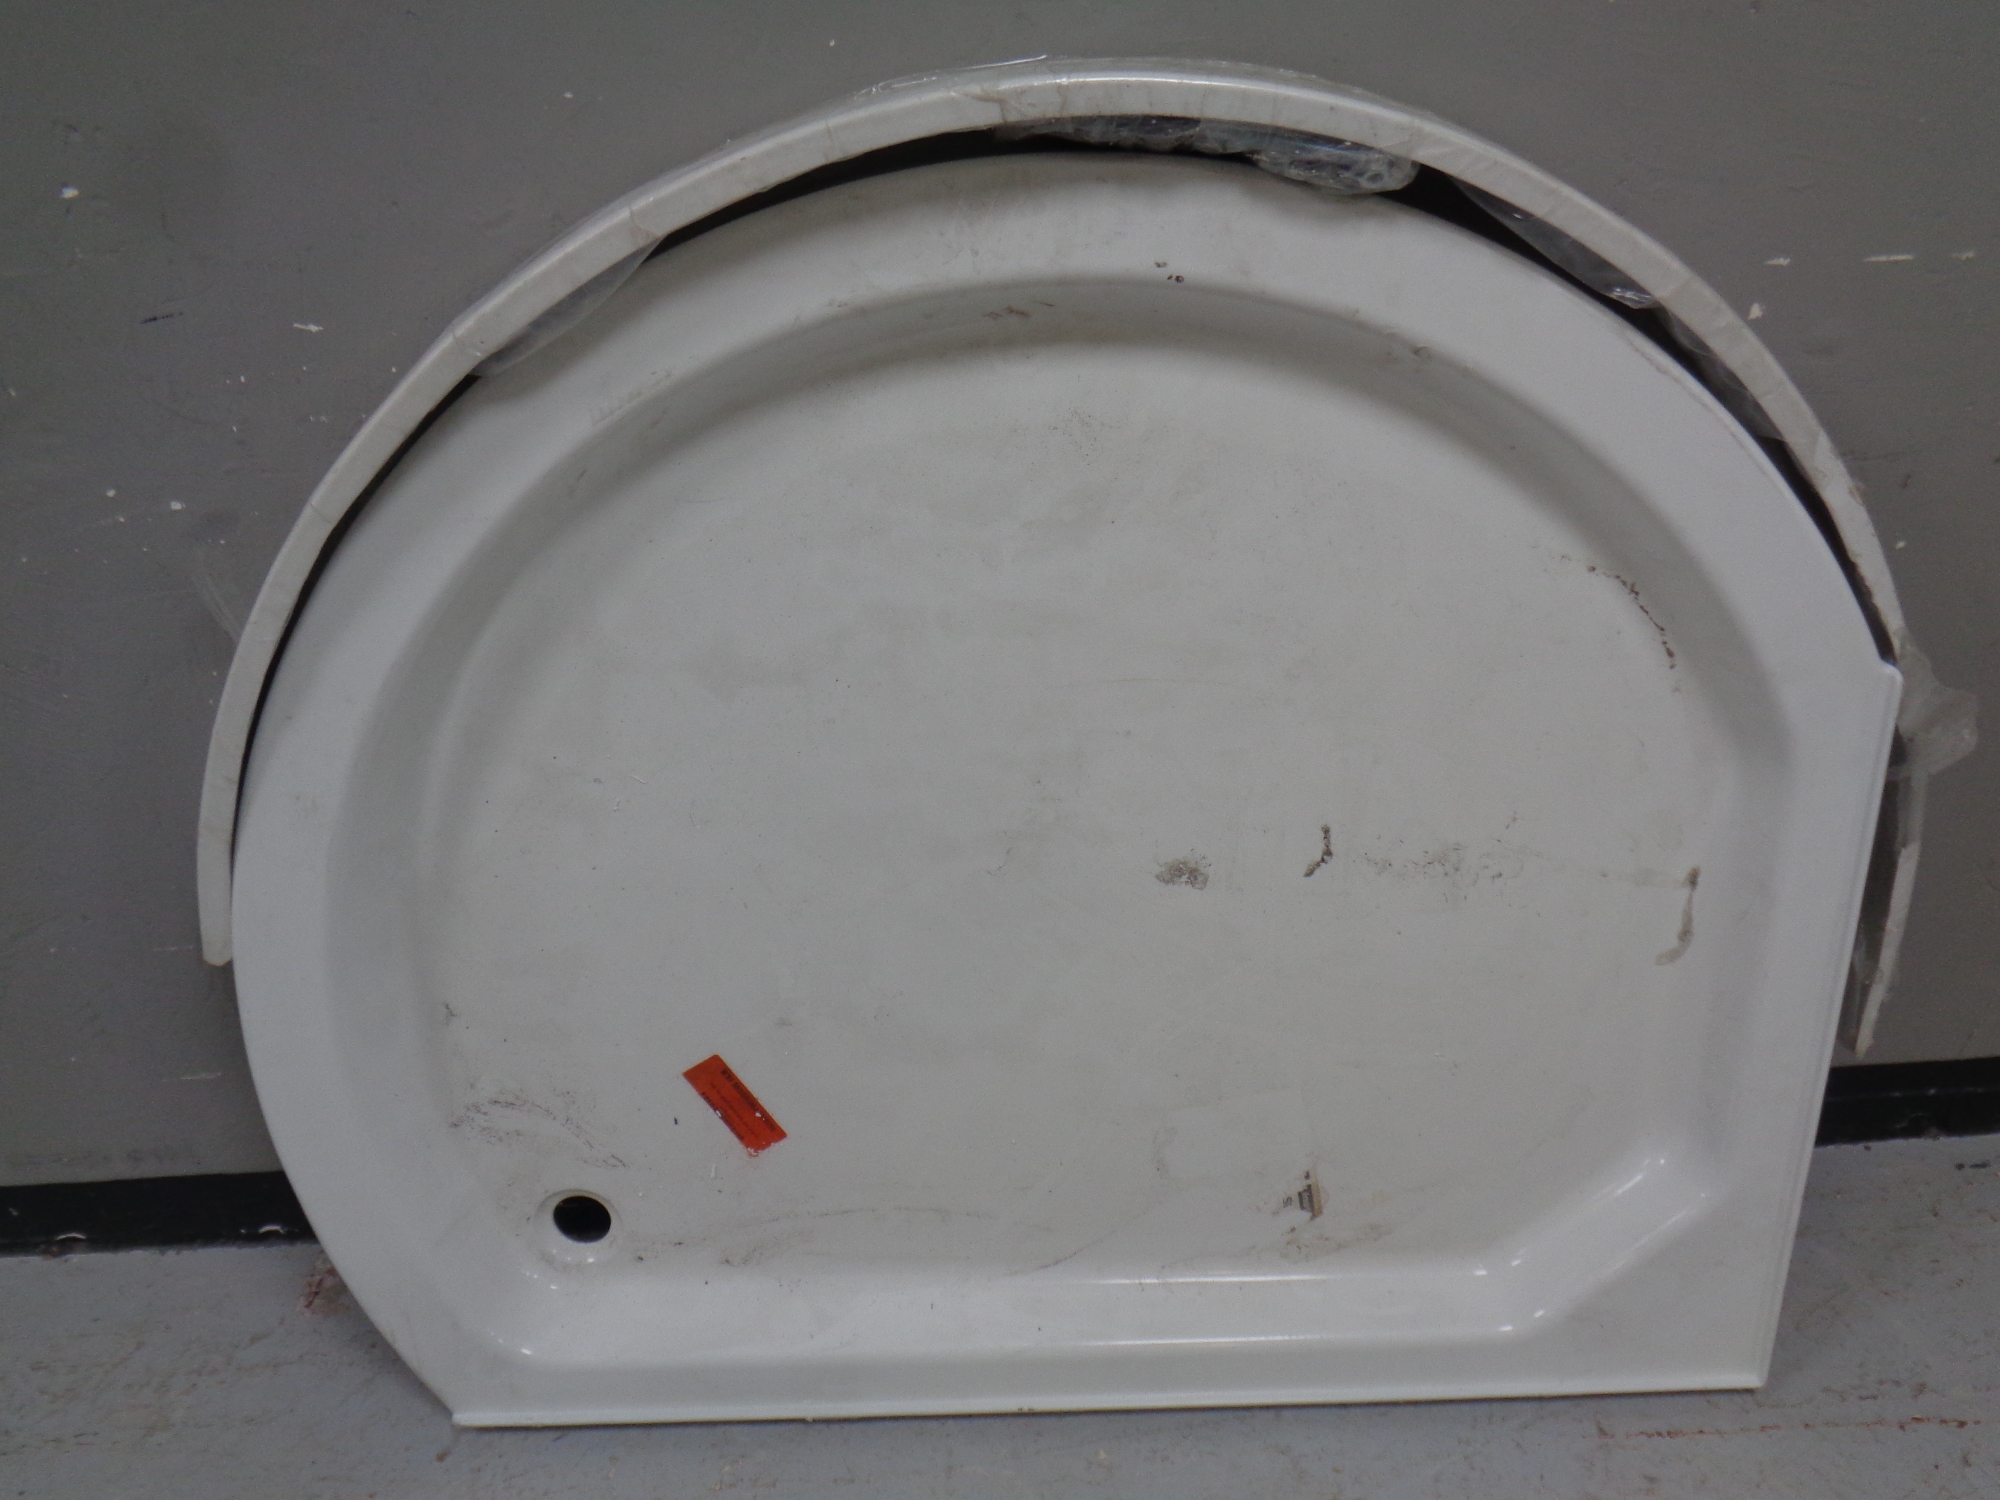 A 1200 mm D-shaped shower tray